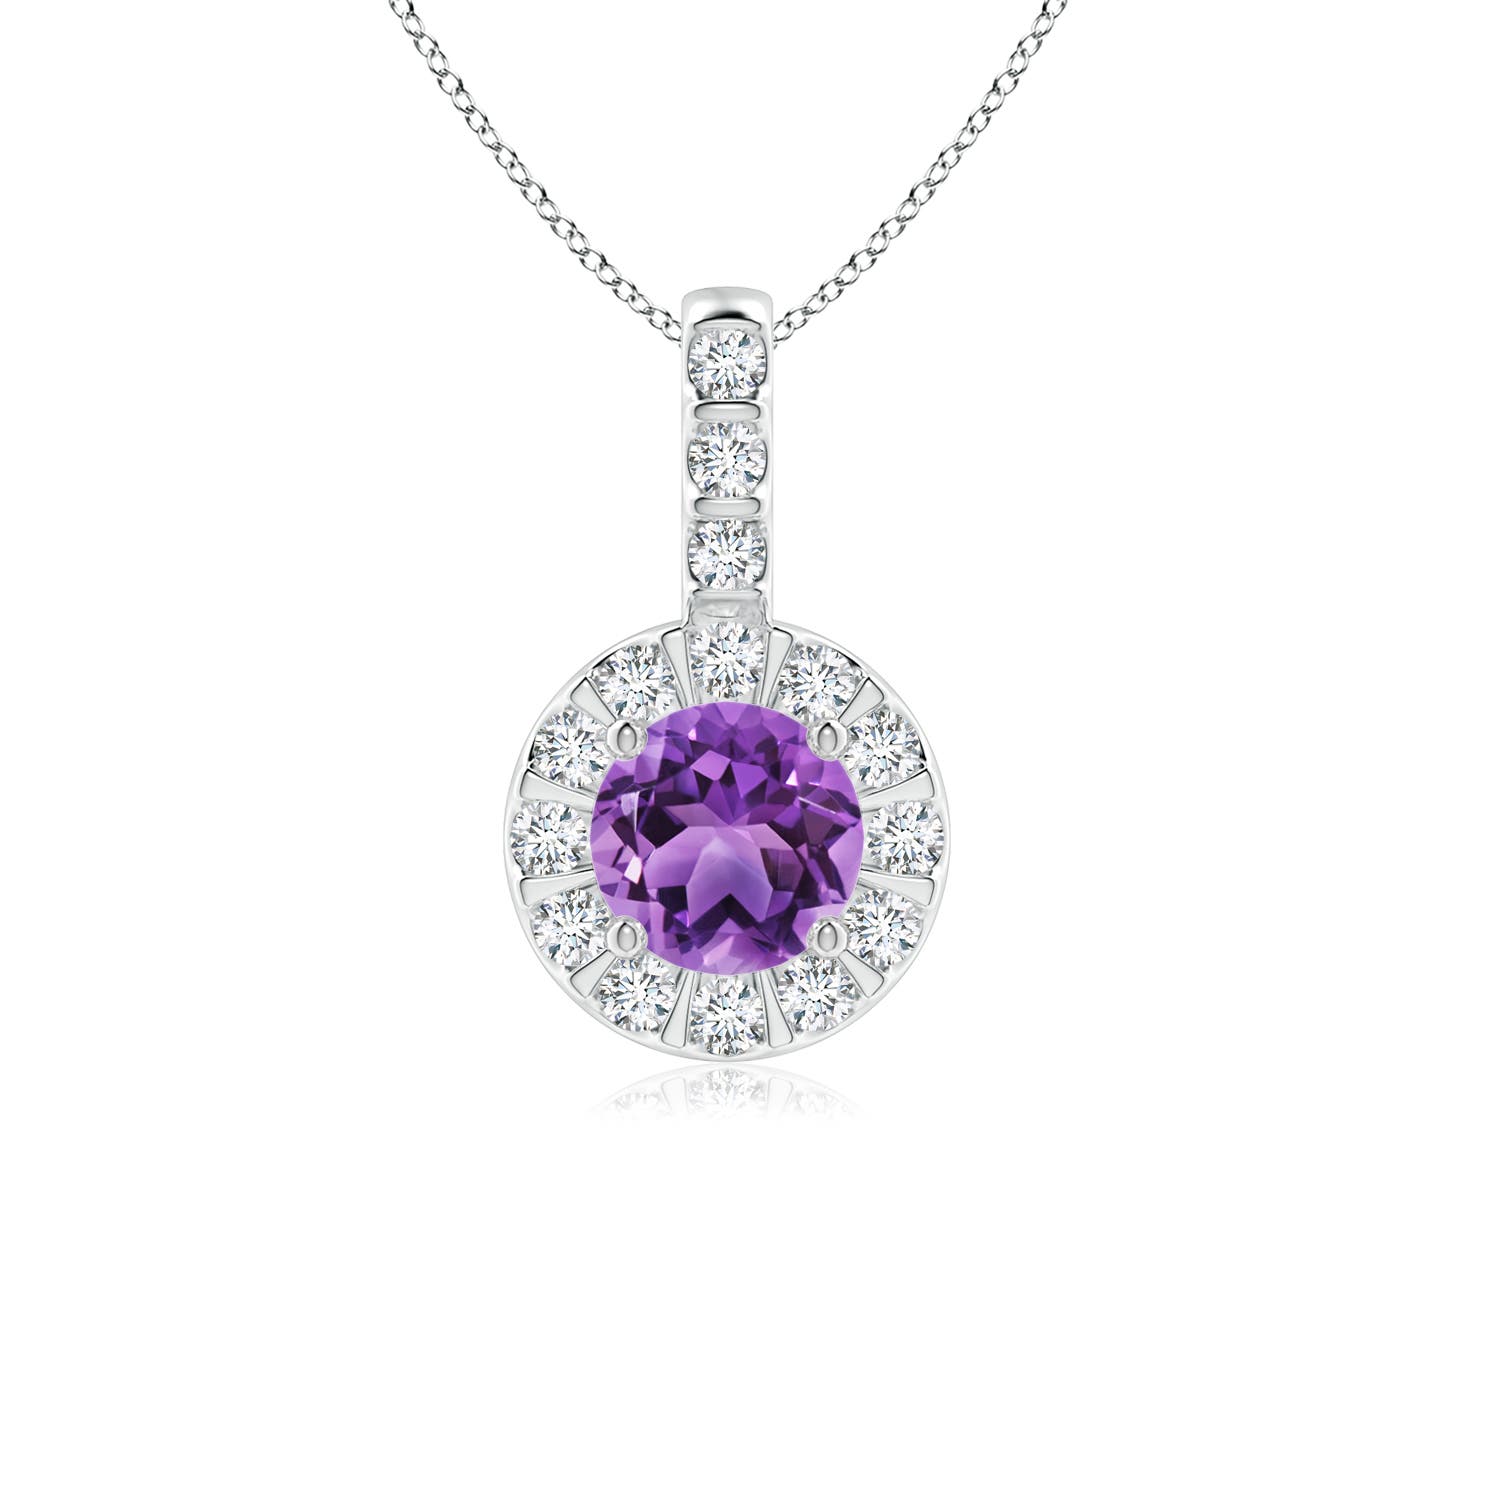 AA - Amethyst / 0.63 CT / 14 KT White Gold